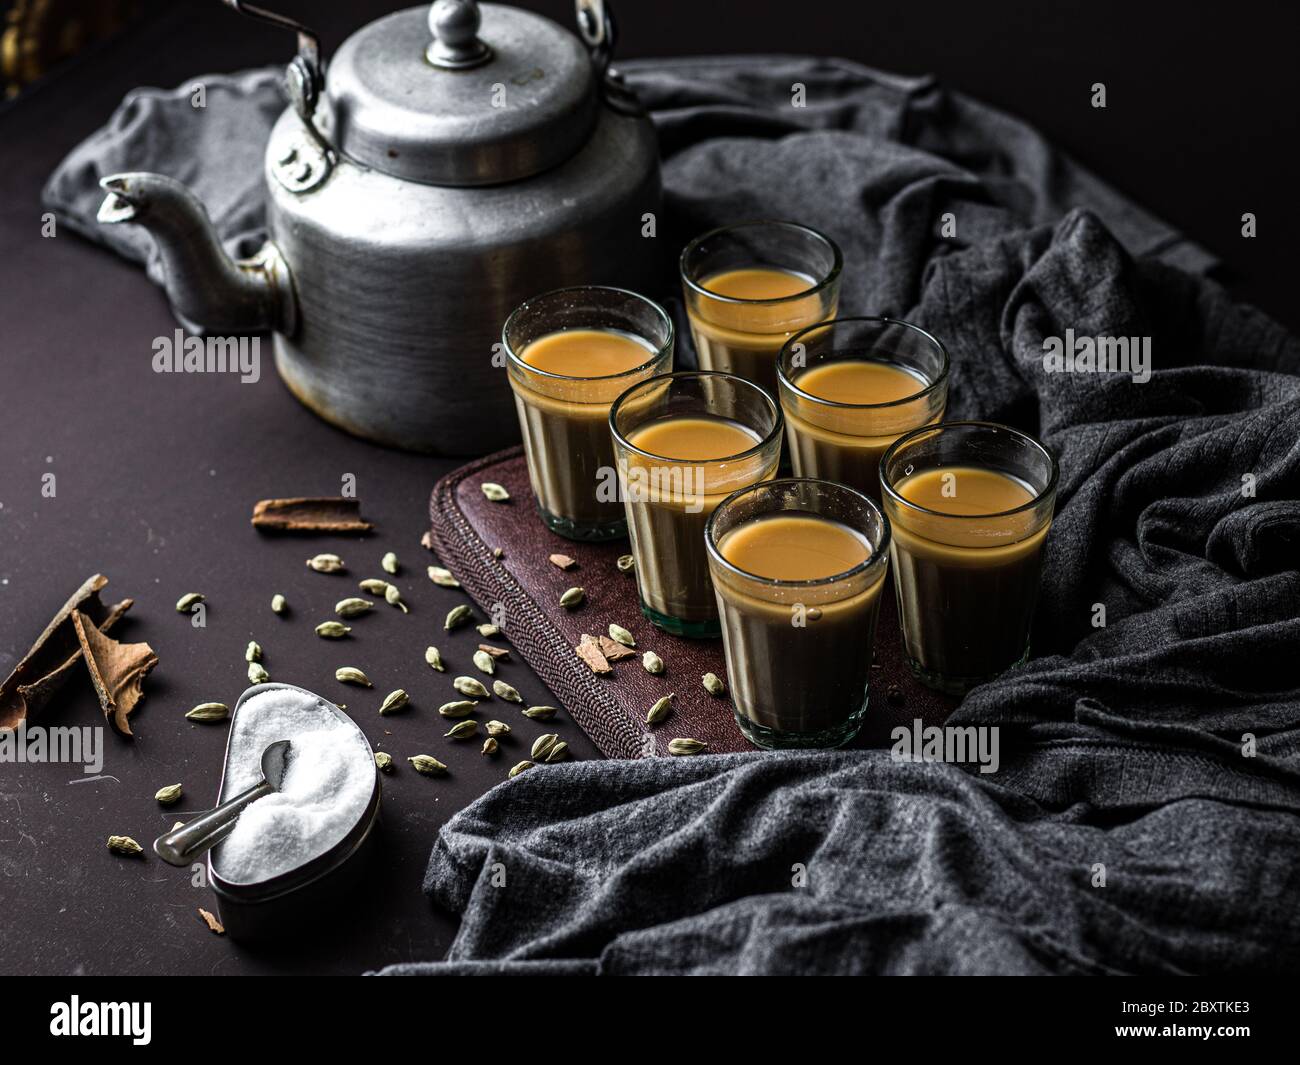 https://c8.alamy.com/comp/2BXTKE3/indian-chai-in-glass-cups-with-metal-kettle-and-other-masalas-to-make-the-tea-2BXTKE3.jpg